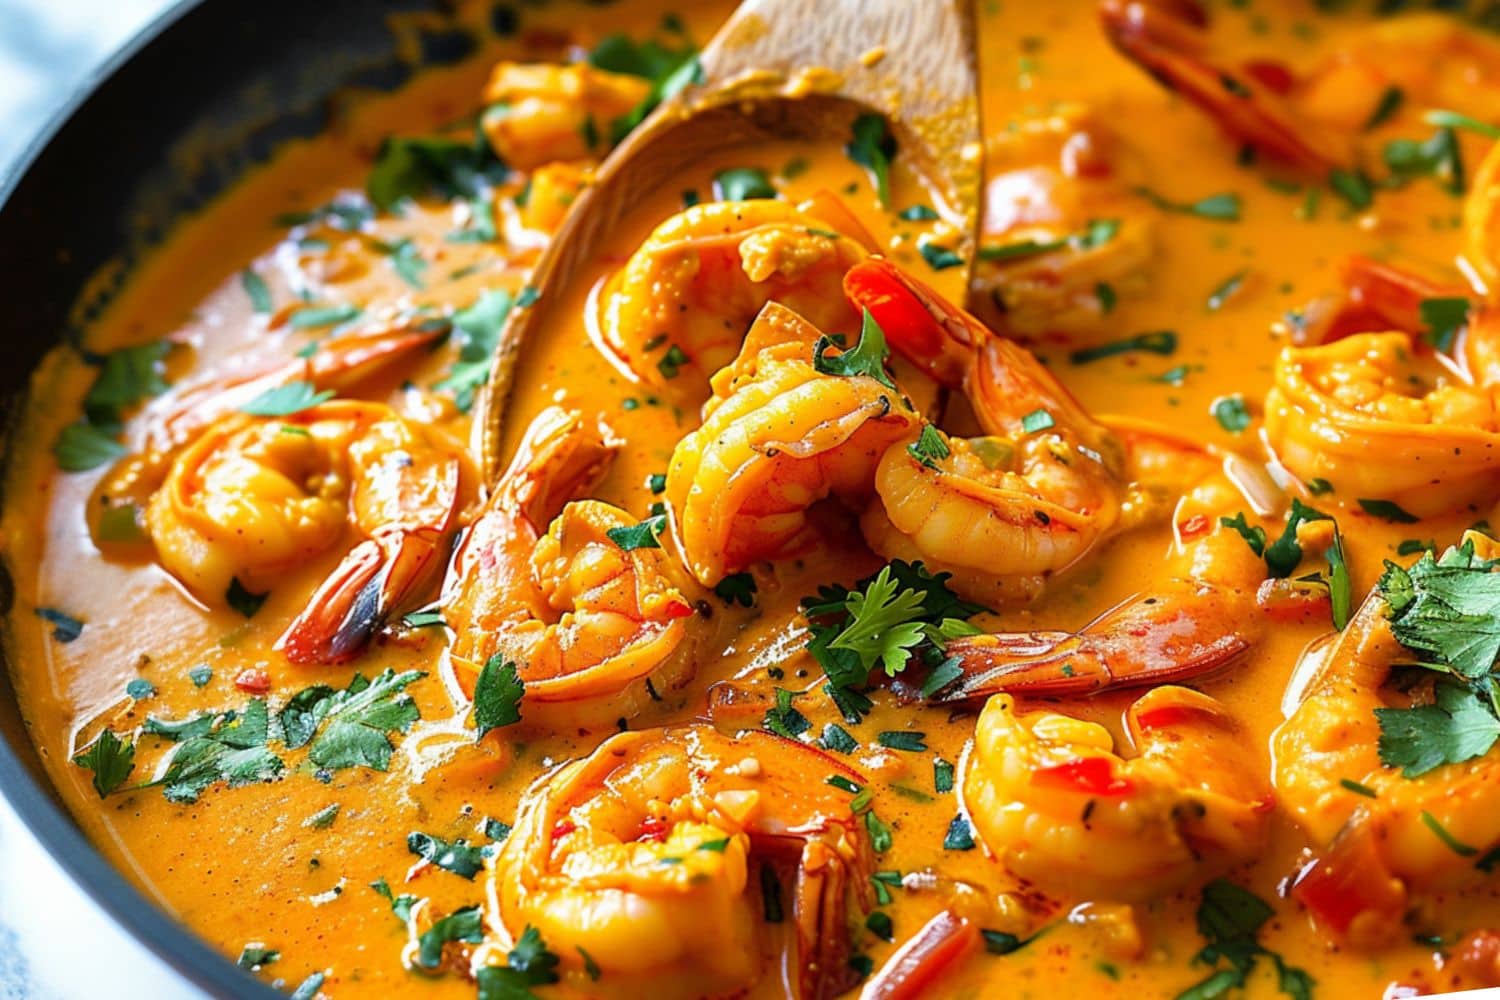 Coconut shrimp curry tossed with a wooden ladle in a large wok pan.